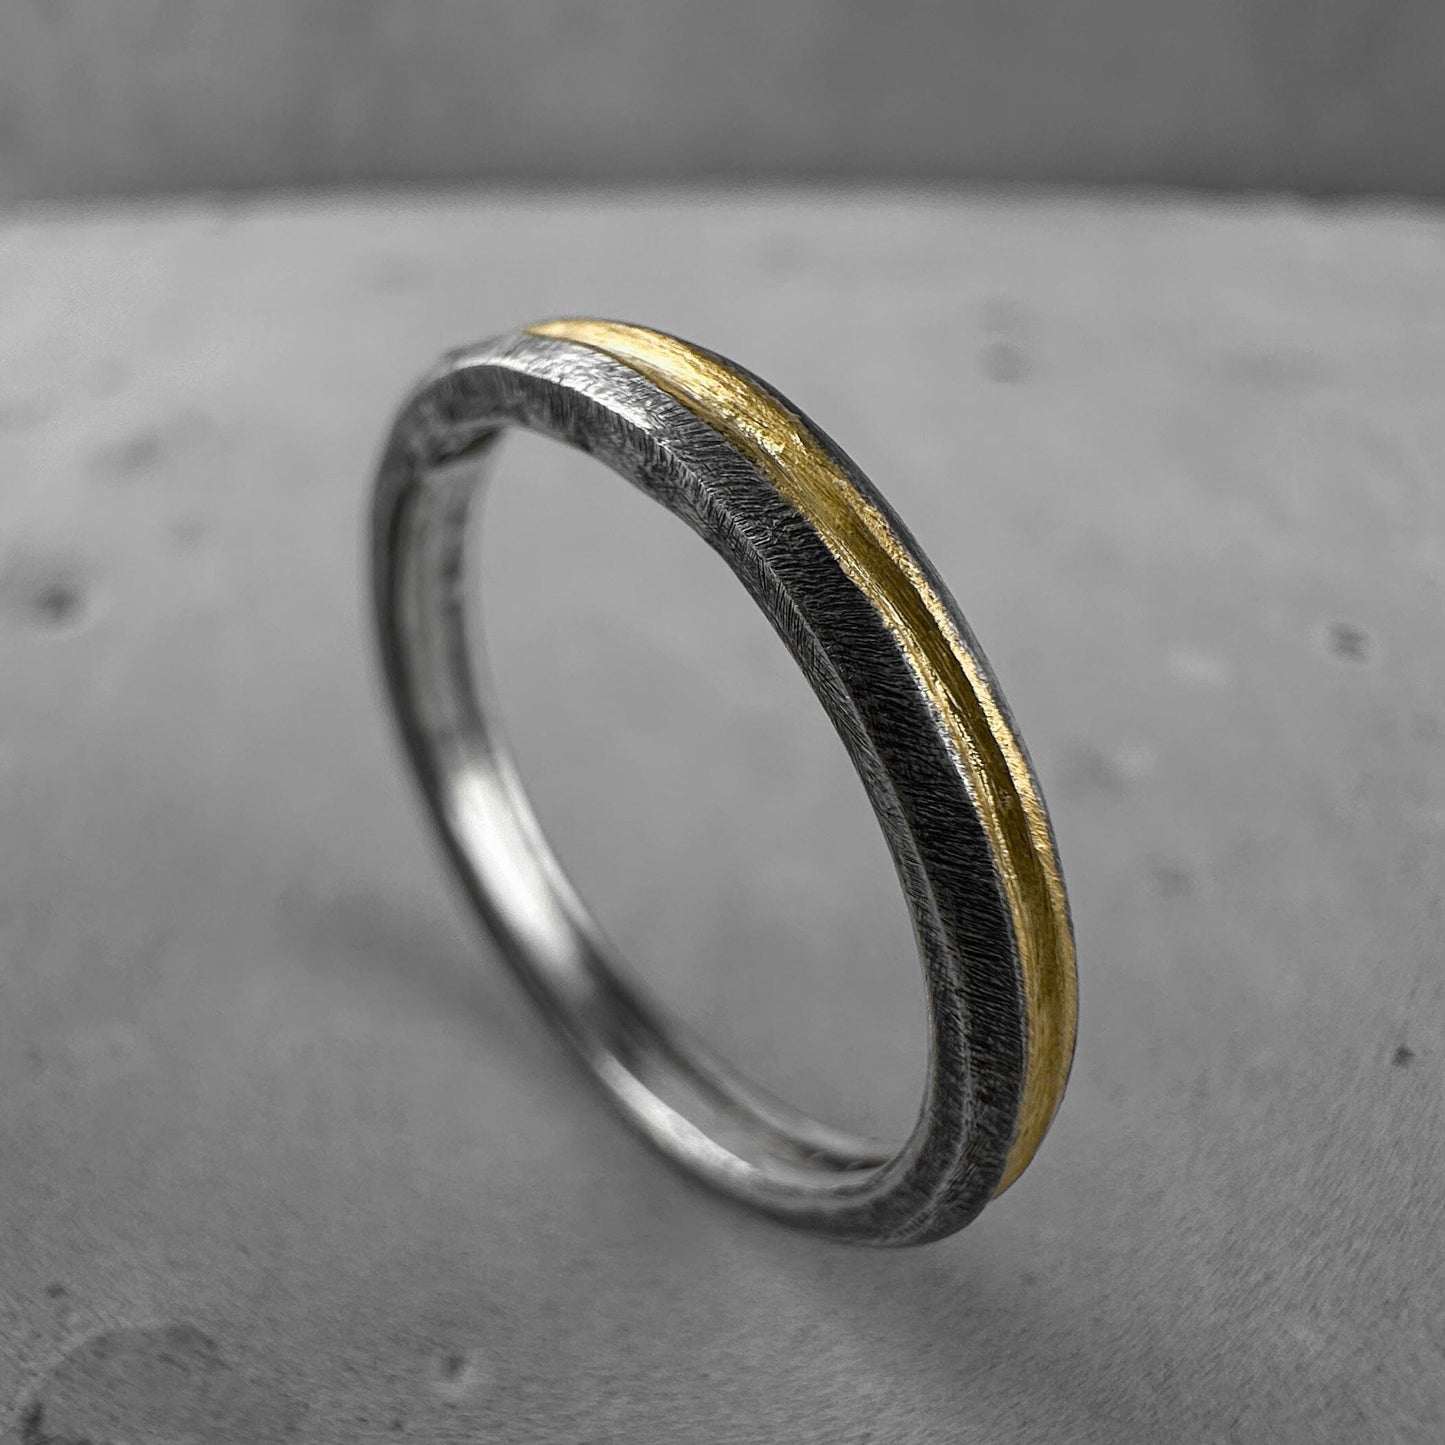 Golden line Ring- elegant light silver ring with a soft scratched texture and 24k gold plated strip Lightweight rings Project50g 